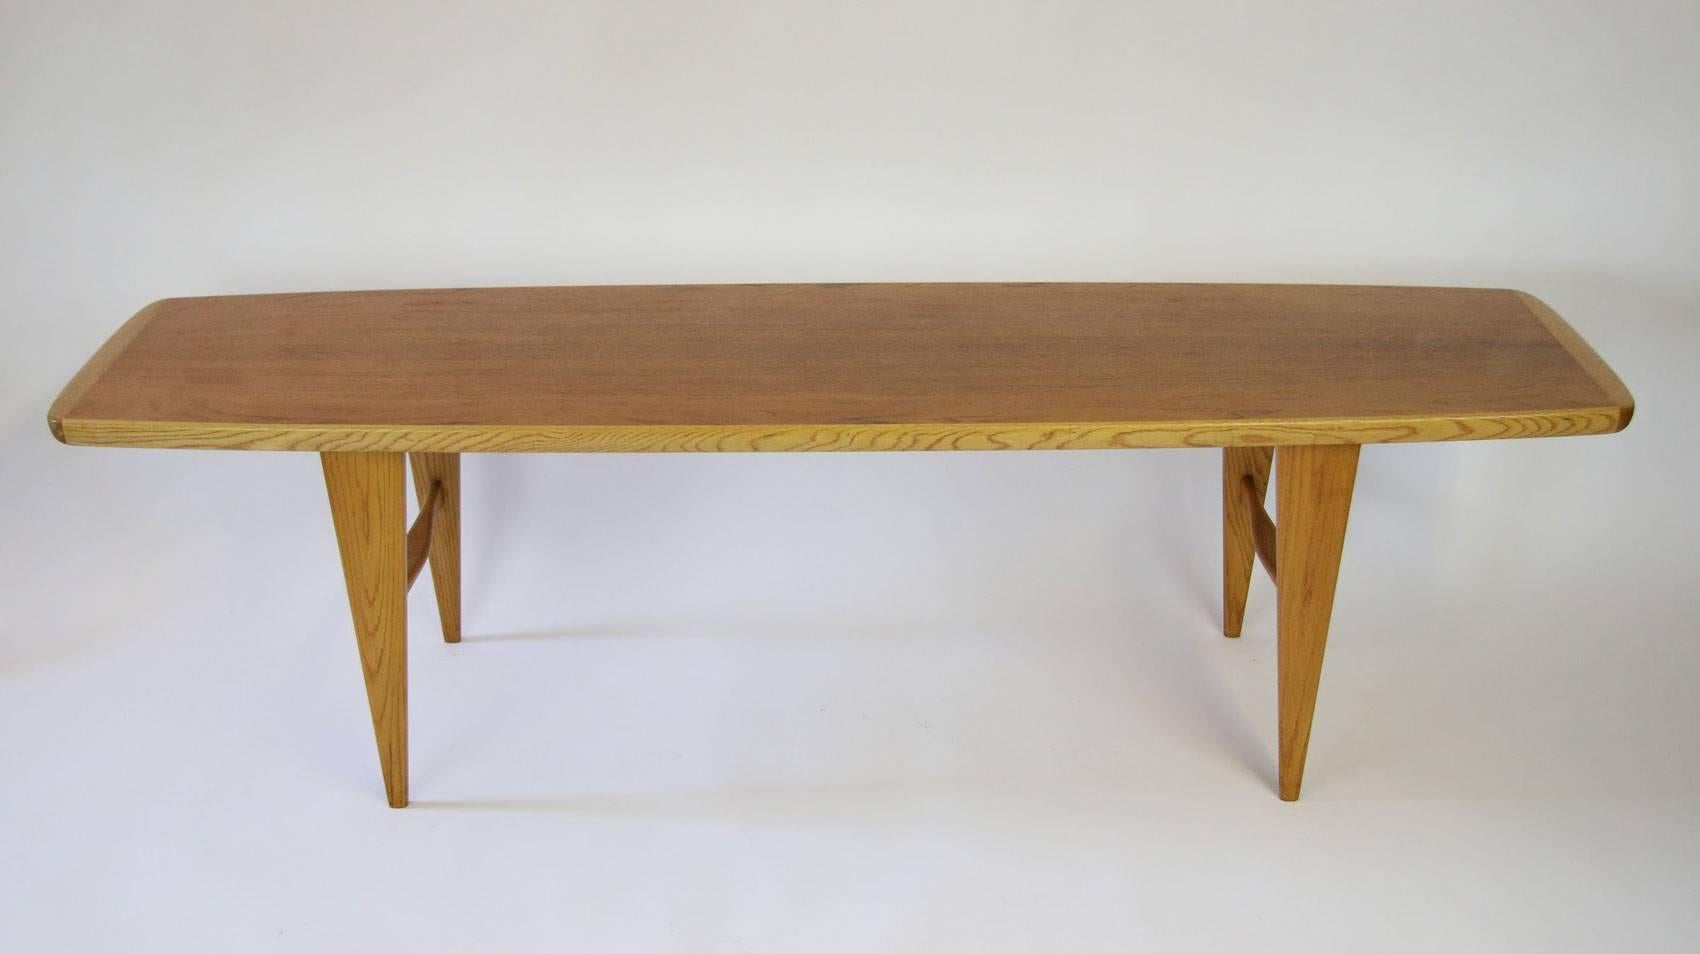 Svante Skogh teak and oak surfboard coffee table. Manufactured by Seffle Mobler of Sweden. Excellent condition. Beautiful tapered legs with sculpted supports.